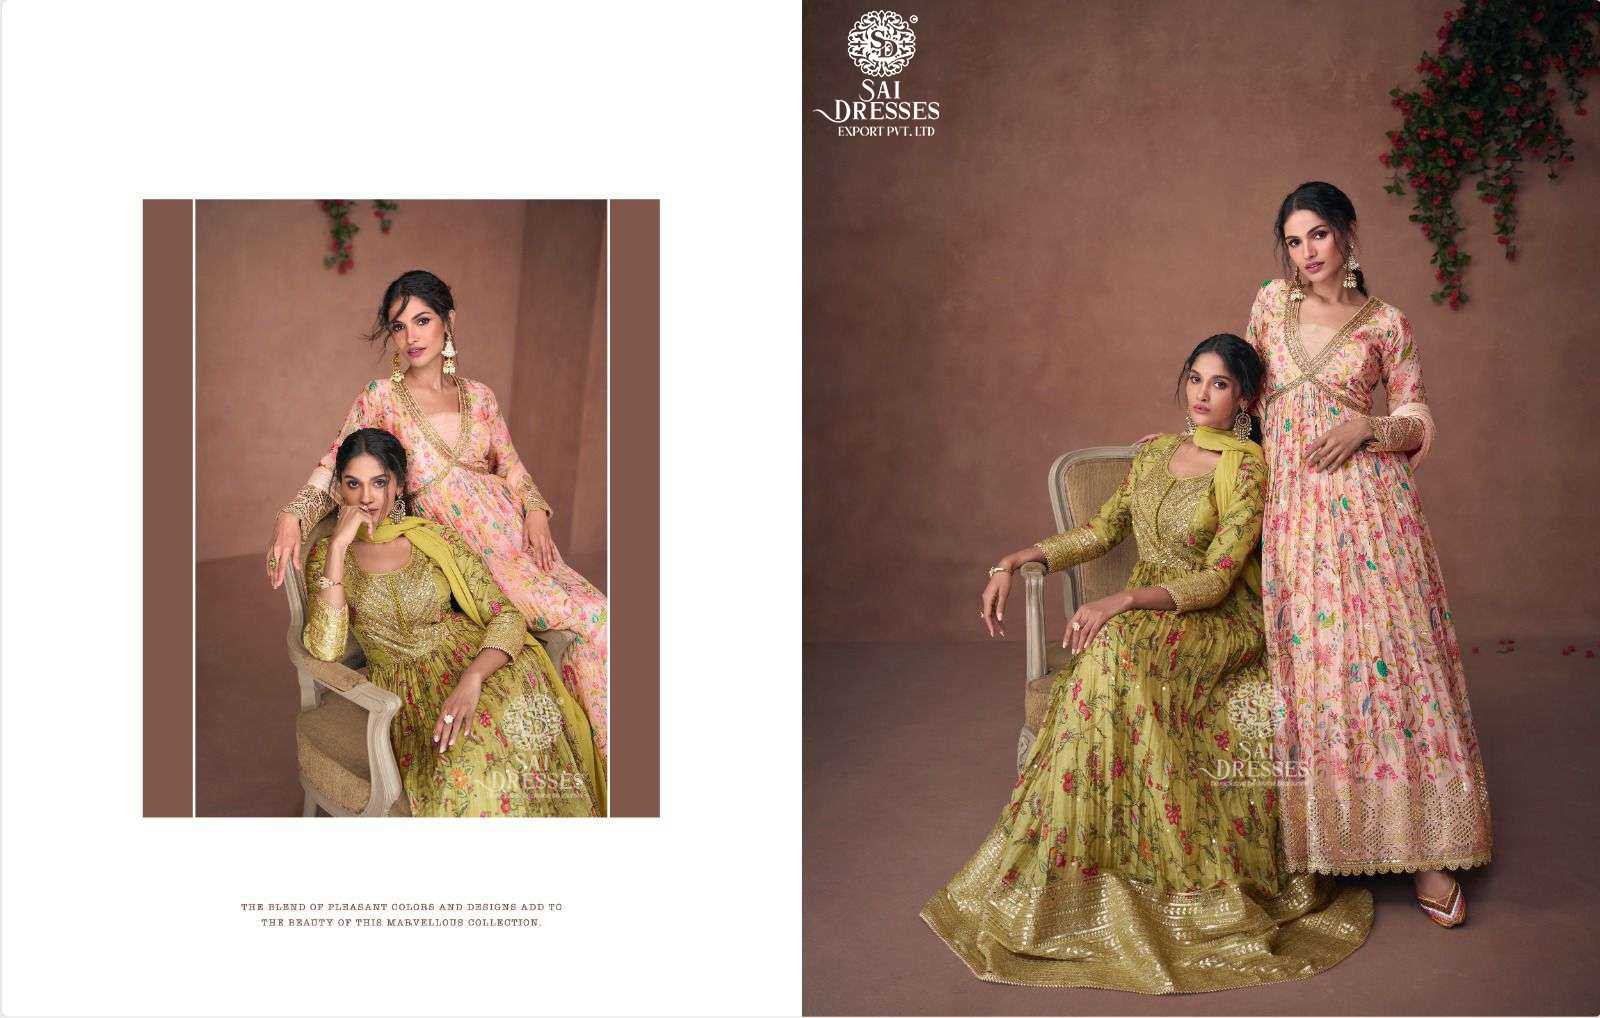 SAI DRESSES PRESENT NOORIAT READYMADE FESTIVE WEAR DESIGNER LONG GOWN WITH DUPATTA IN WHOLESALE RATE IN SURAT